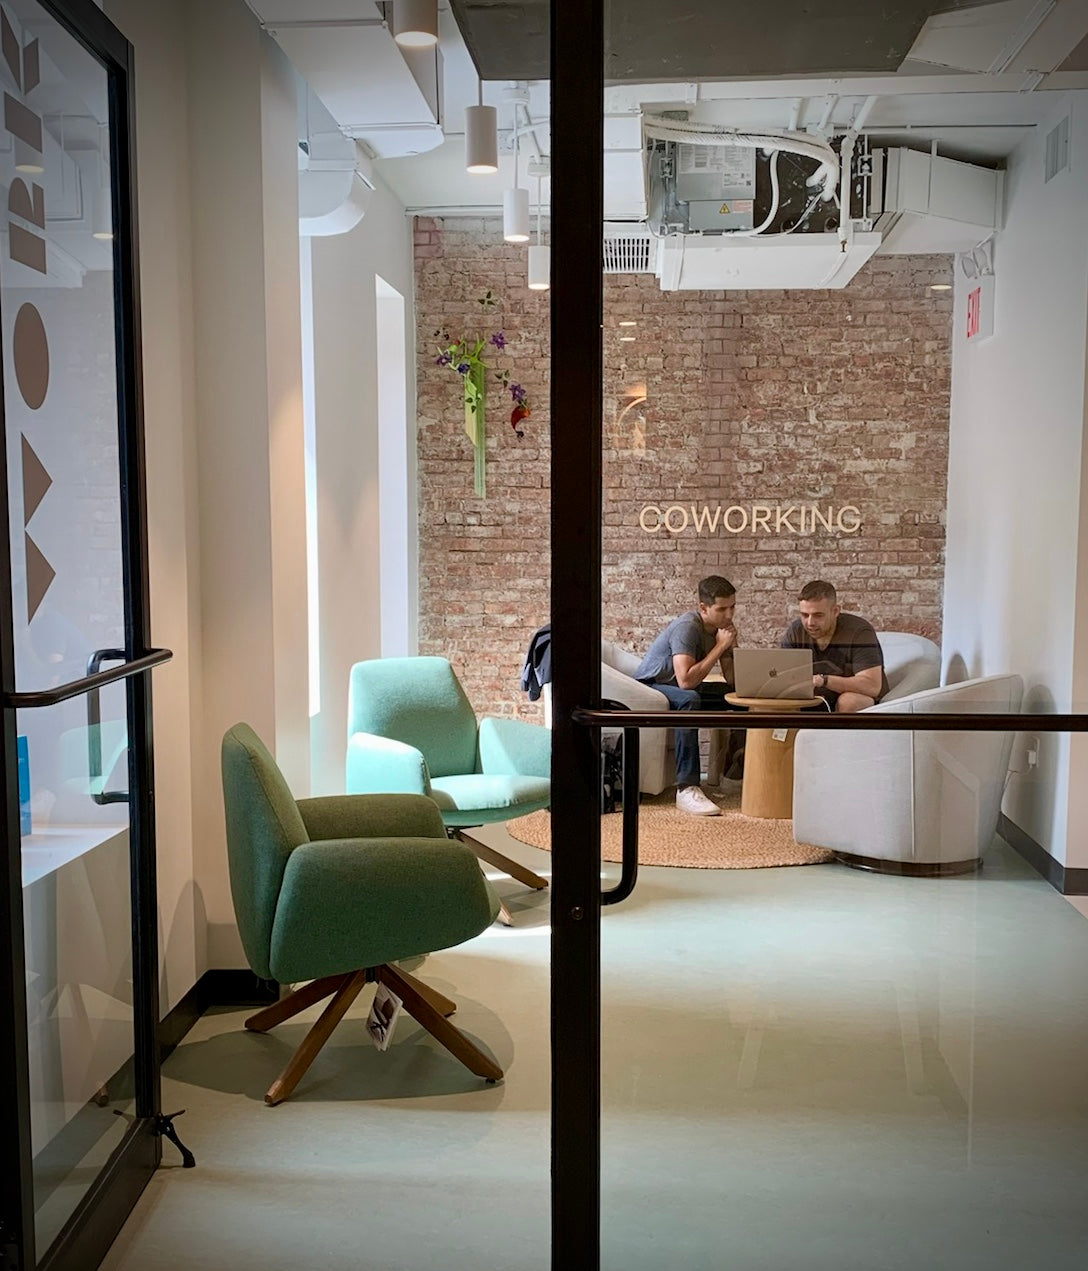 View of our coworking space entrance with two dads working together on a laptop sitting on our comfortable chairs..